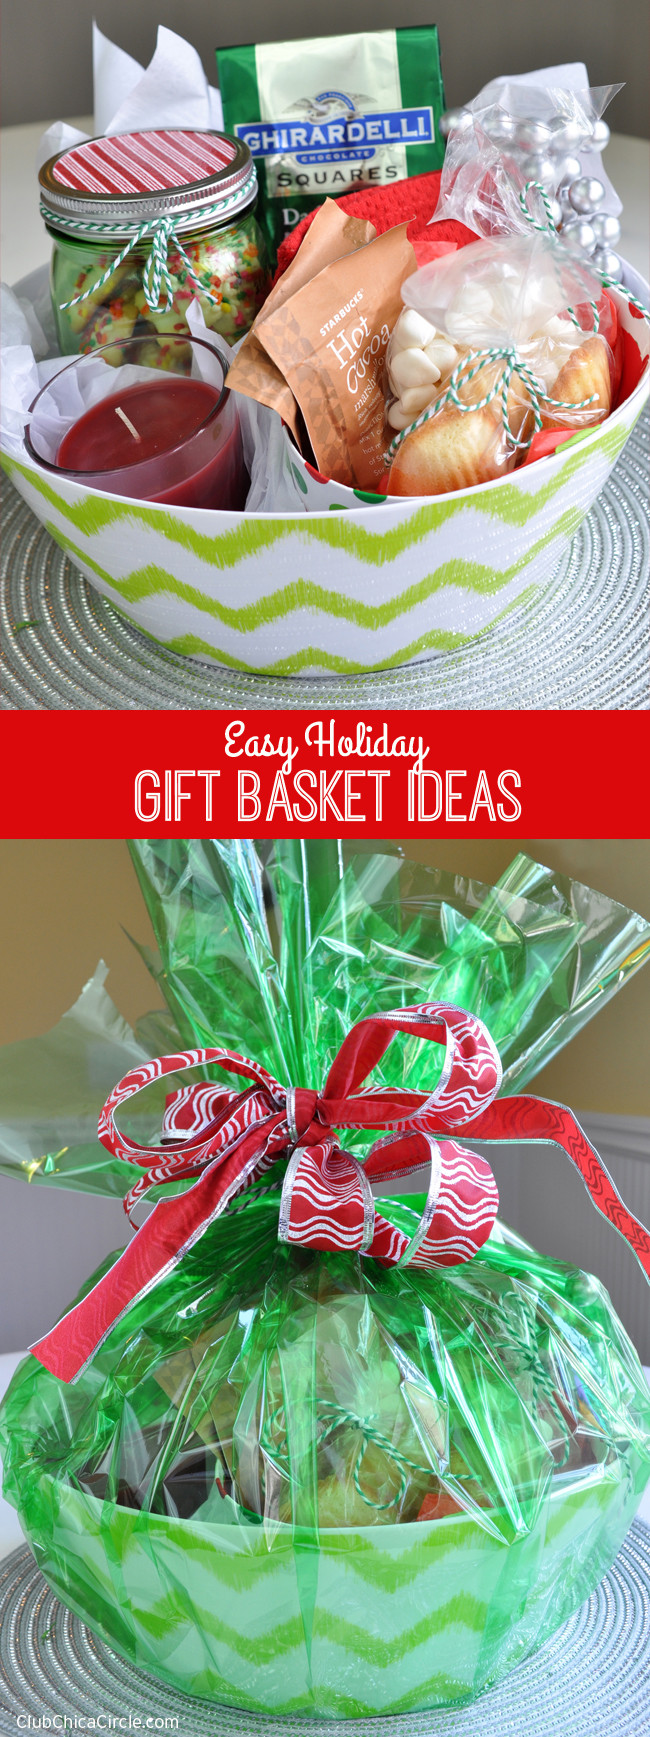 Gift Basket Giveaway Ideas
 Easy Holiday Gift Basket Ideas Giveaway